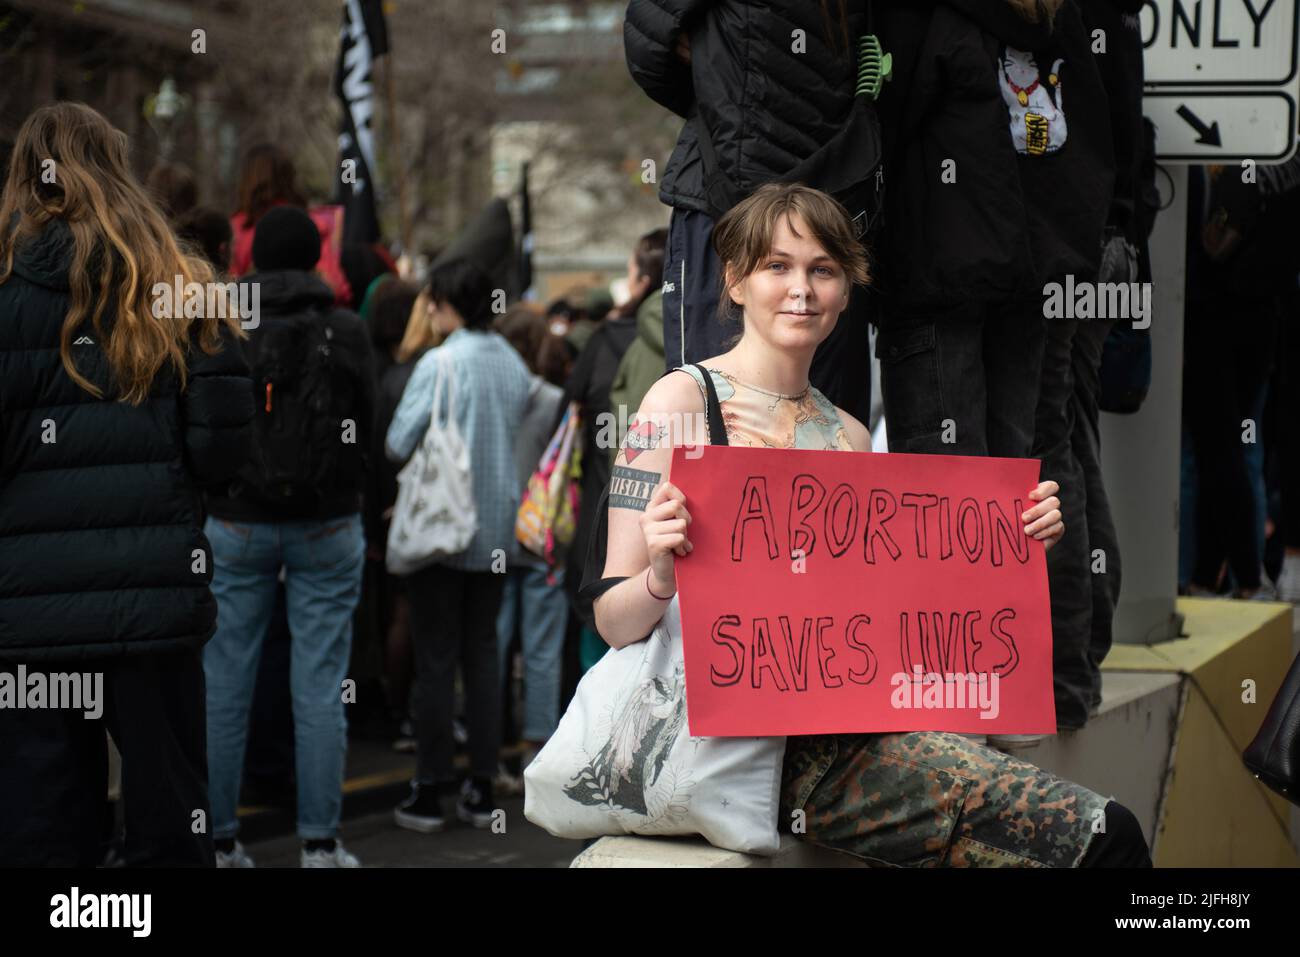 Melbourne, Australia. 2nd July 2022. An attendee of a solidarity protest for abortion rights holds a sign reading 'Abortion Saves Lives'. Credit: Jay Kogler/Alamy Live News Stock Photo